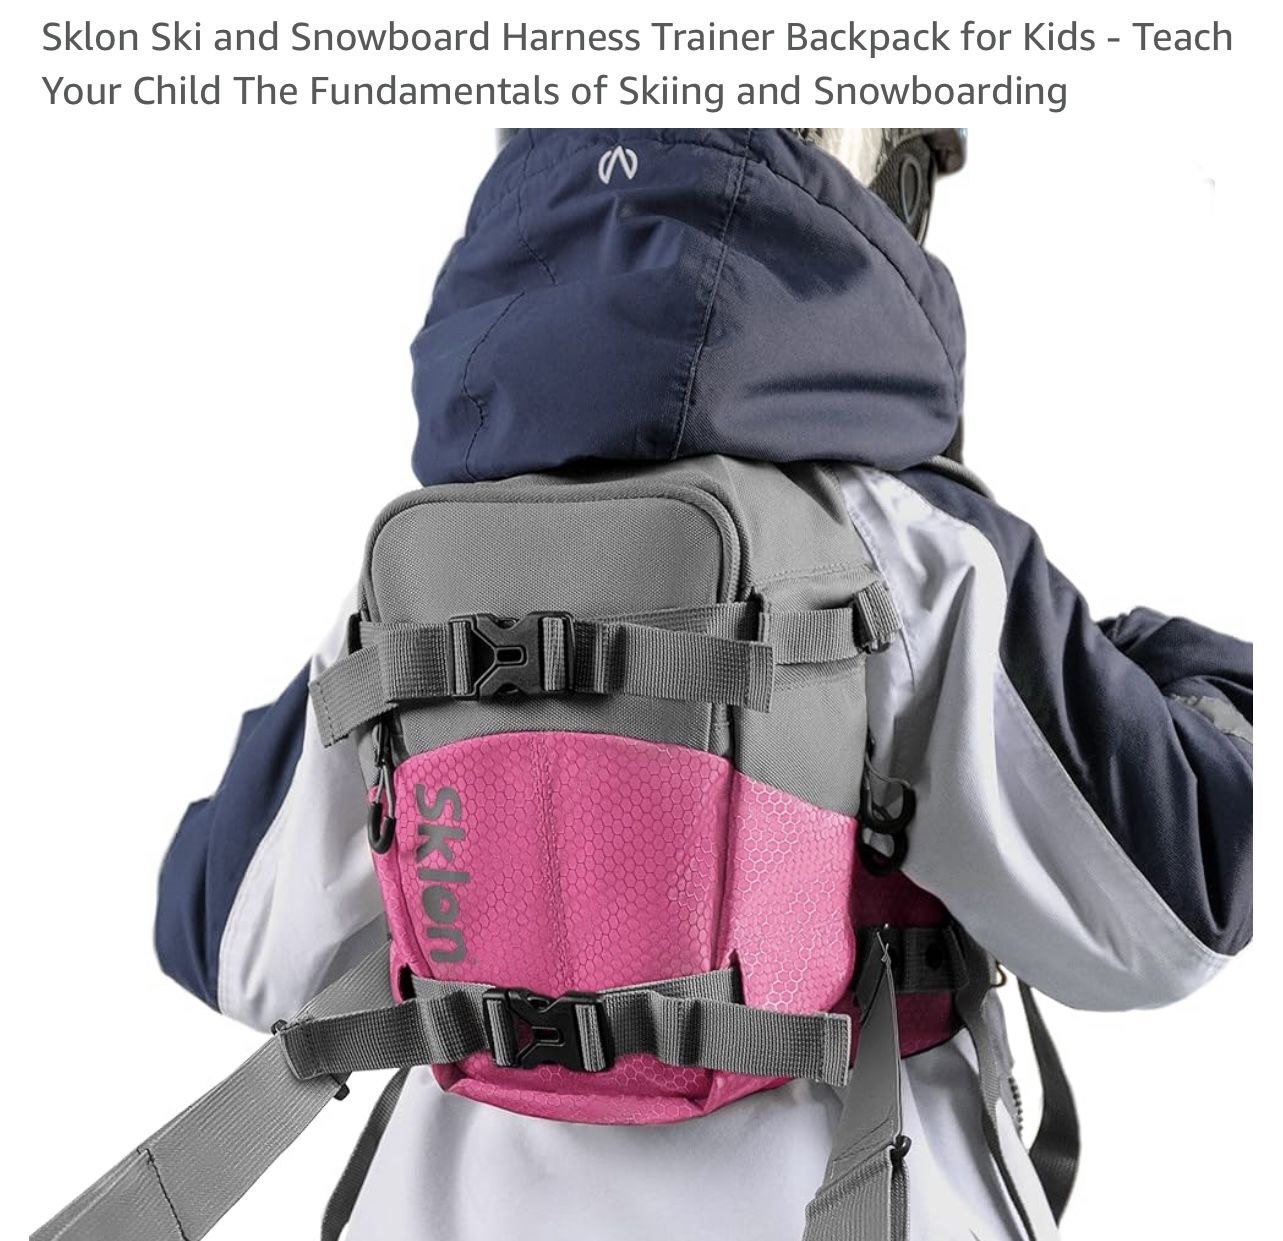 Sklon Ski and Snowboard Harness Trainer Backpack for Kids - Teach Your Child The Fundamentals of Skiing and Snowboarding